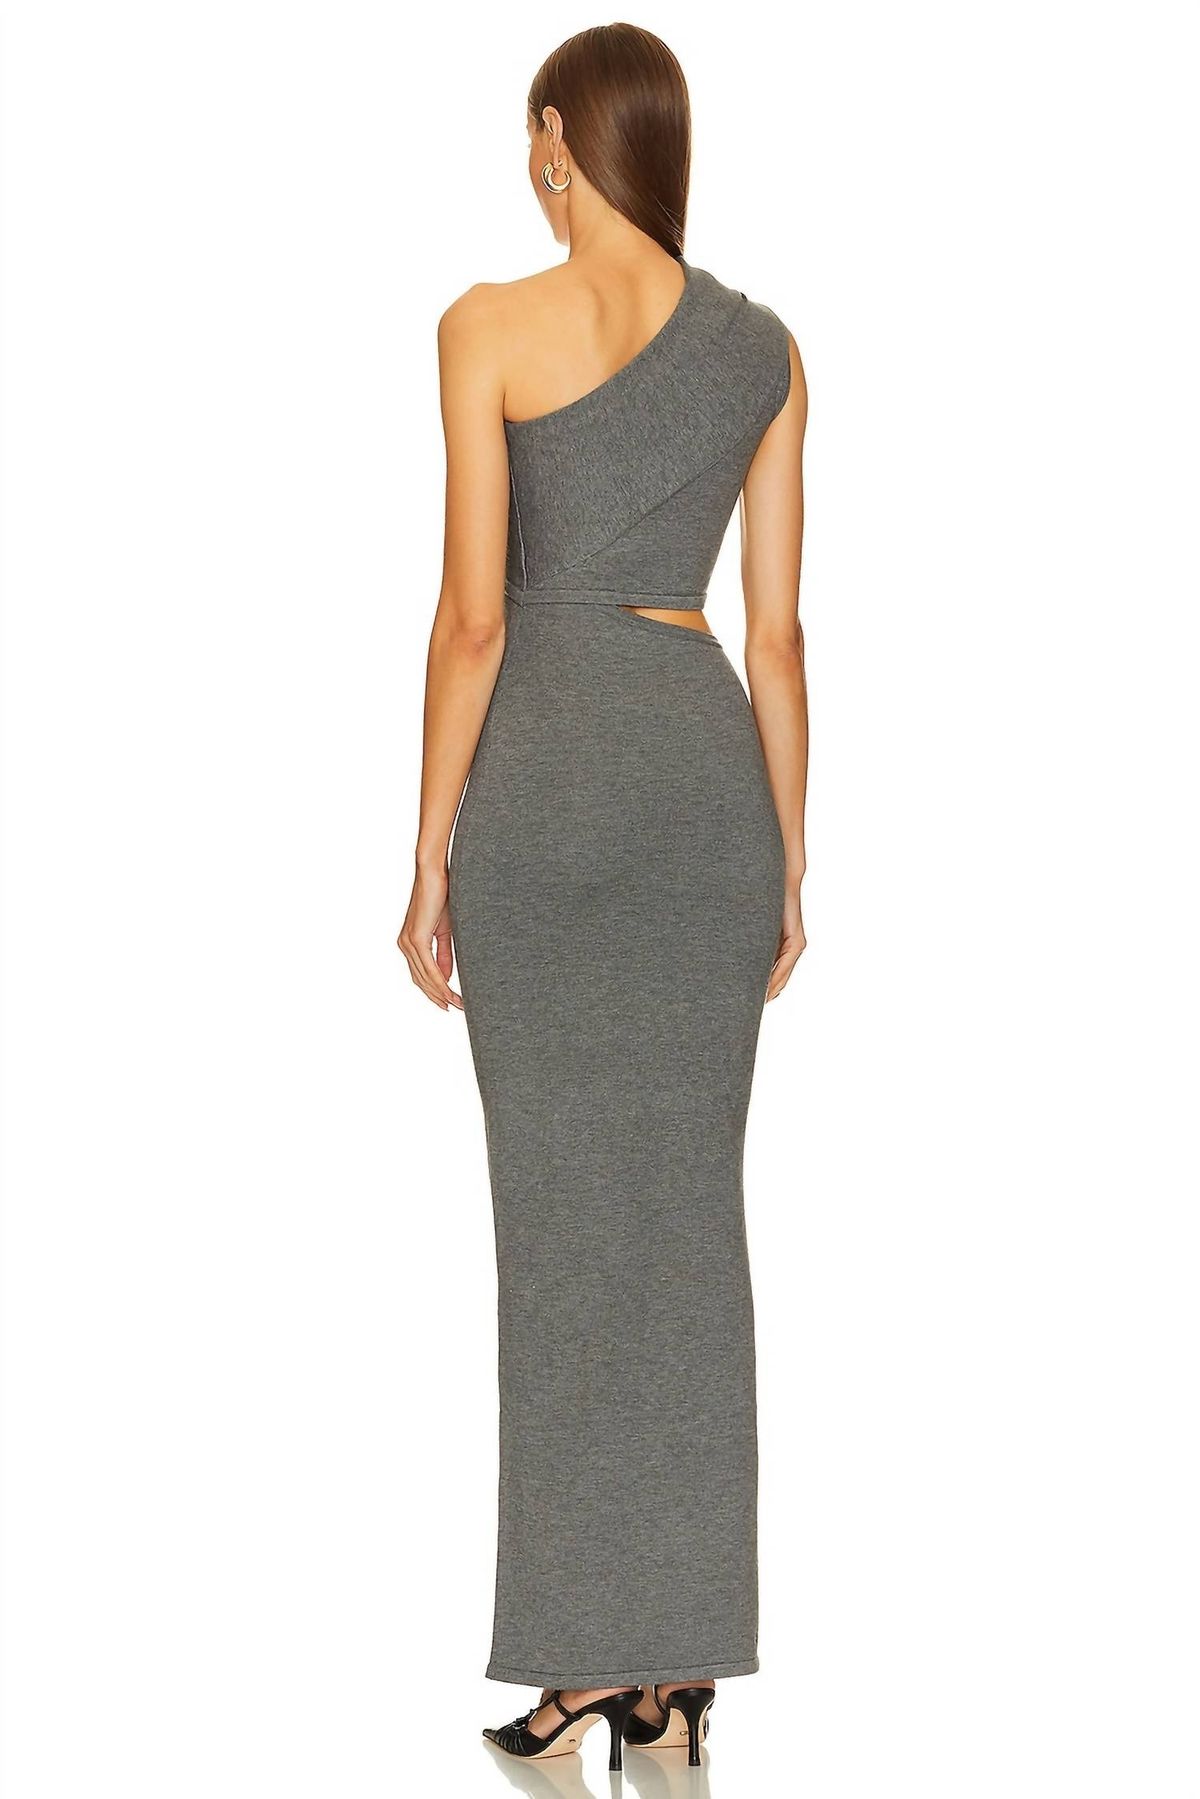 Style 1-1346792127-2901 RONNY KOBO Size M One Shoulder Gray Floor Length Maxi on Queenly